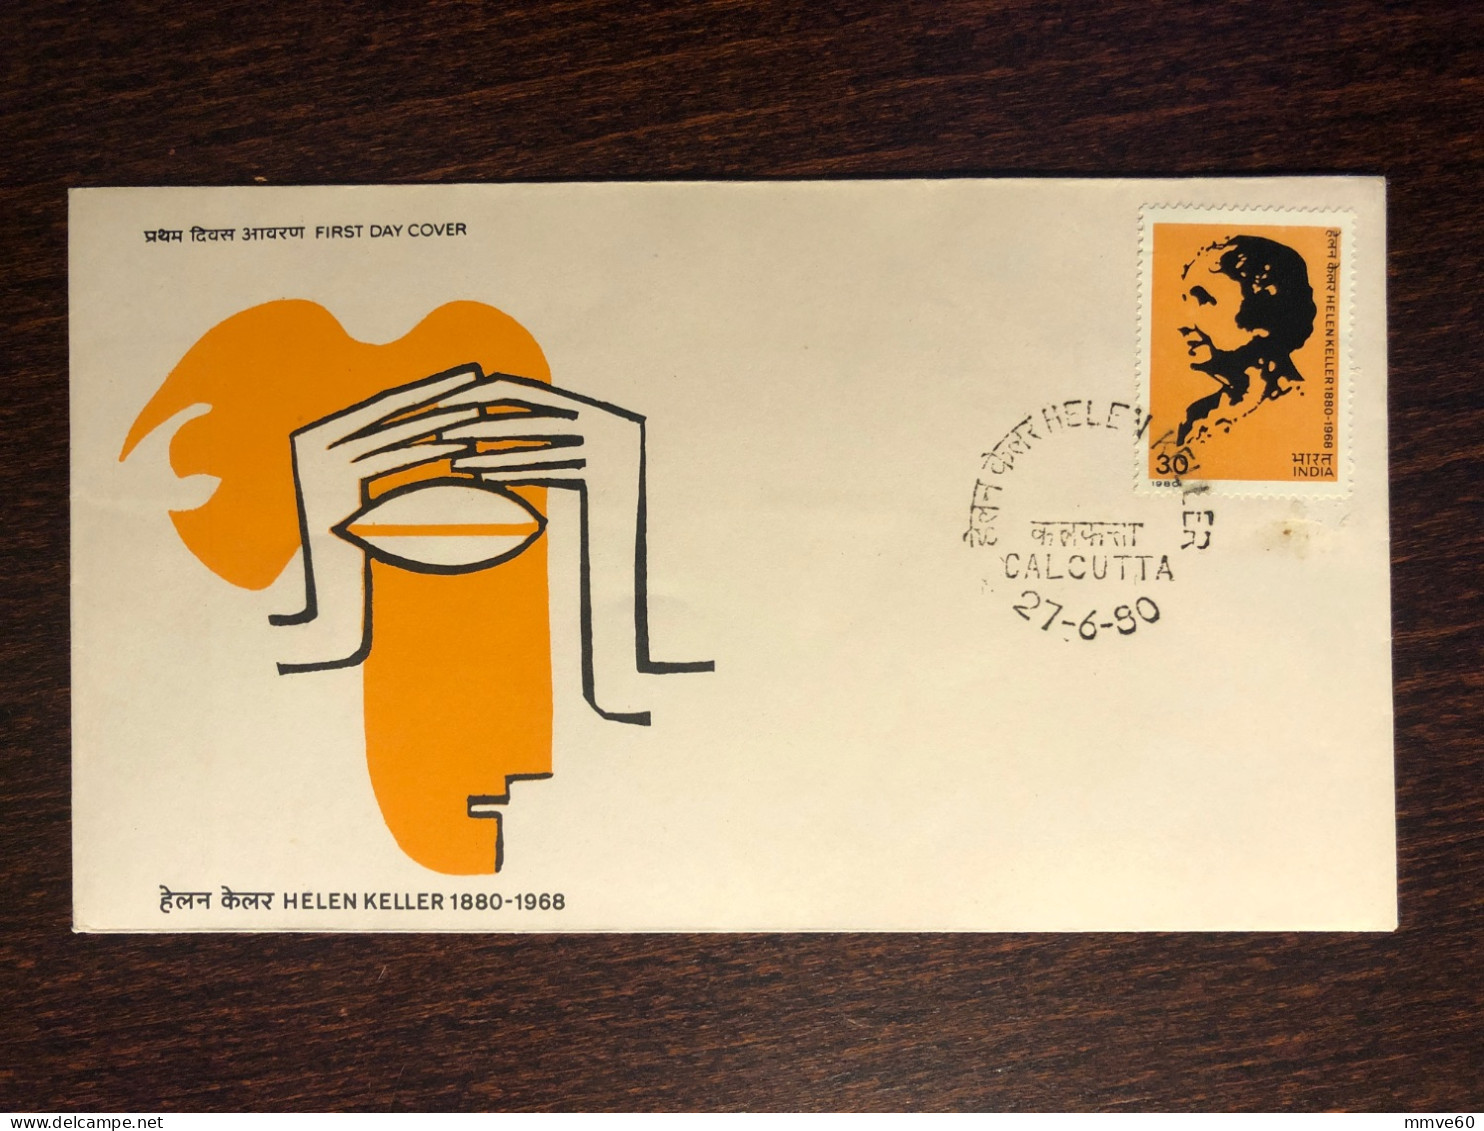 INDIA  FDC COVER 1980 YEAR KELLER BLIND BLINDNESS  HEALTH MEDICINE STAMPS - Covers & Documents